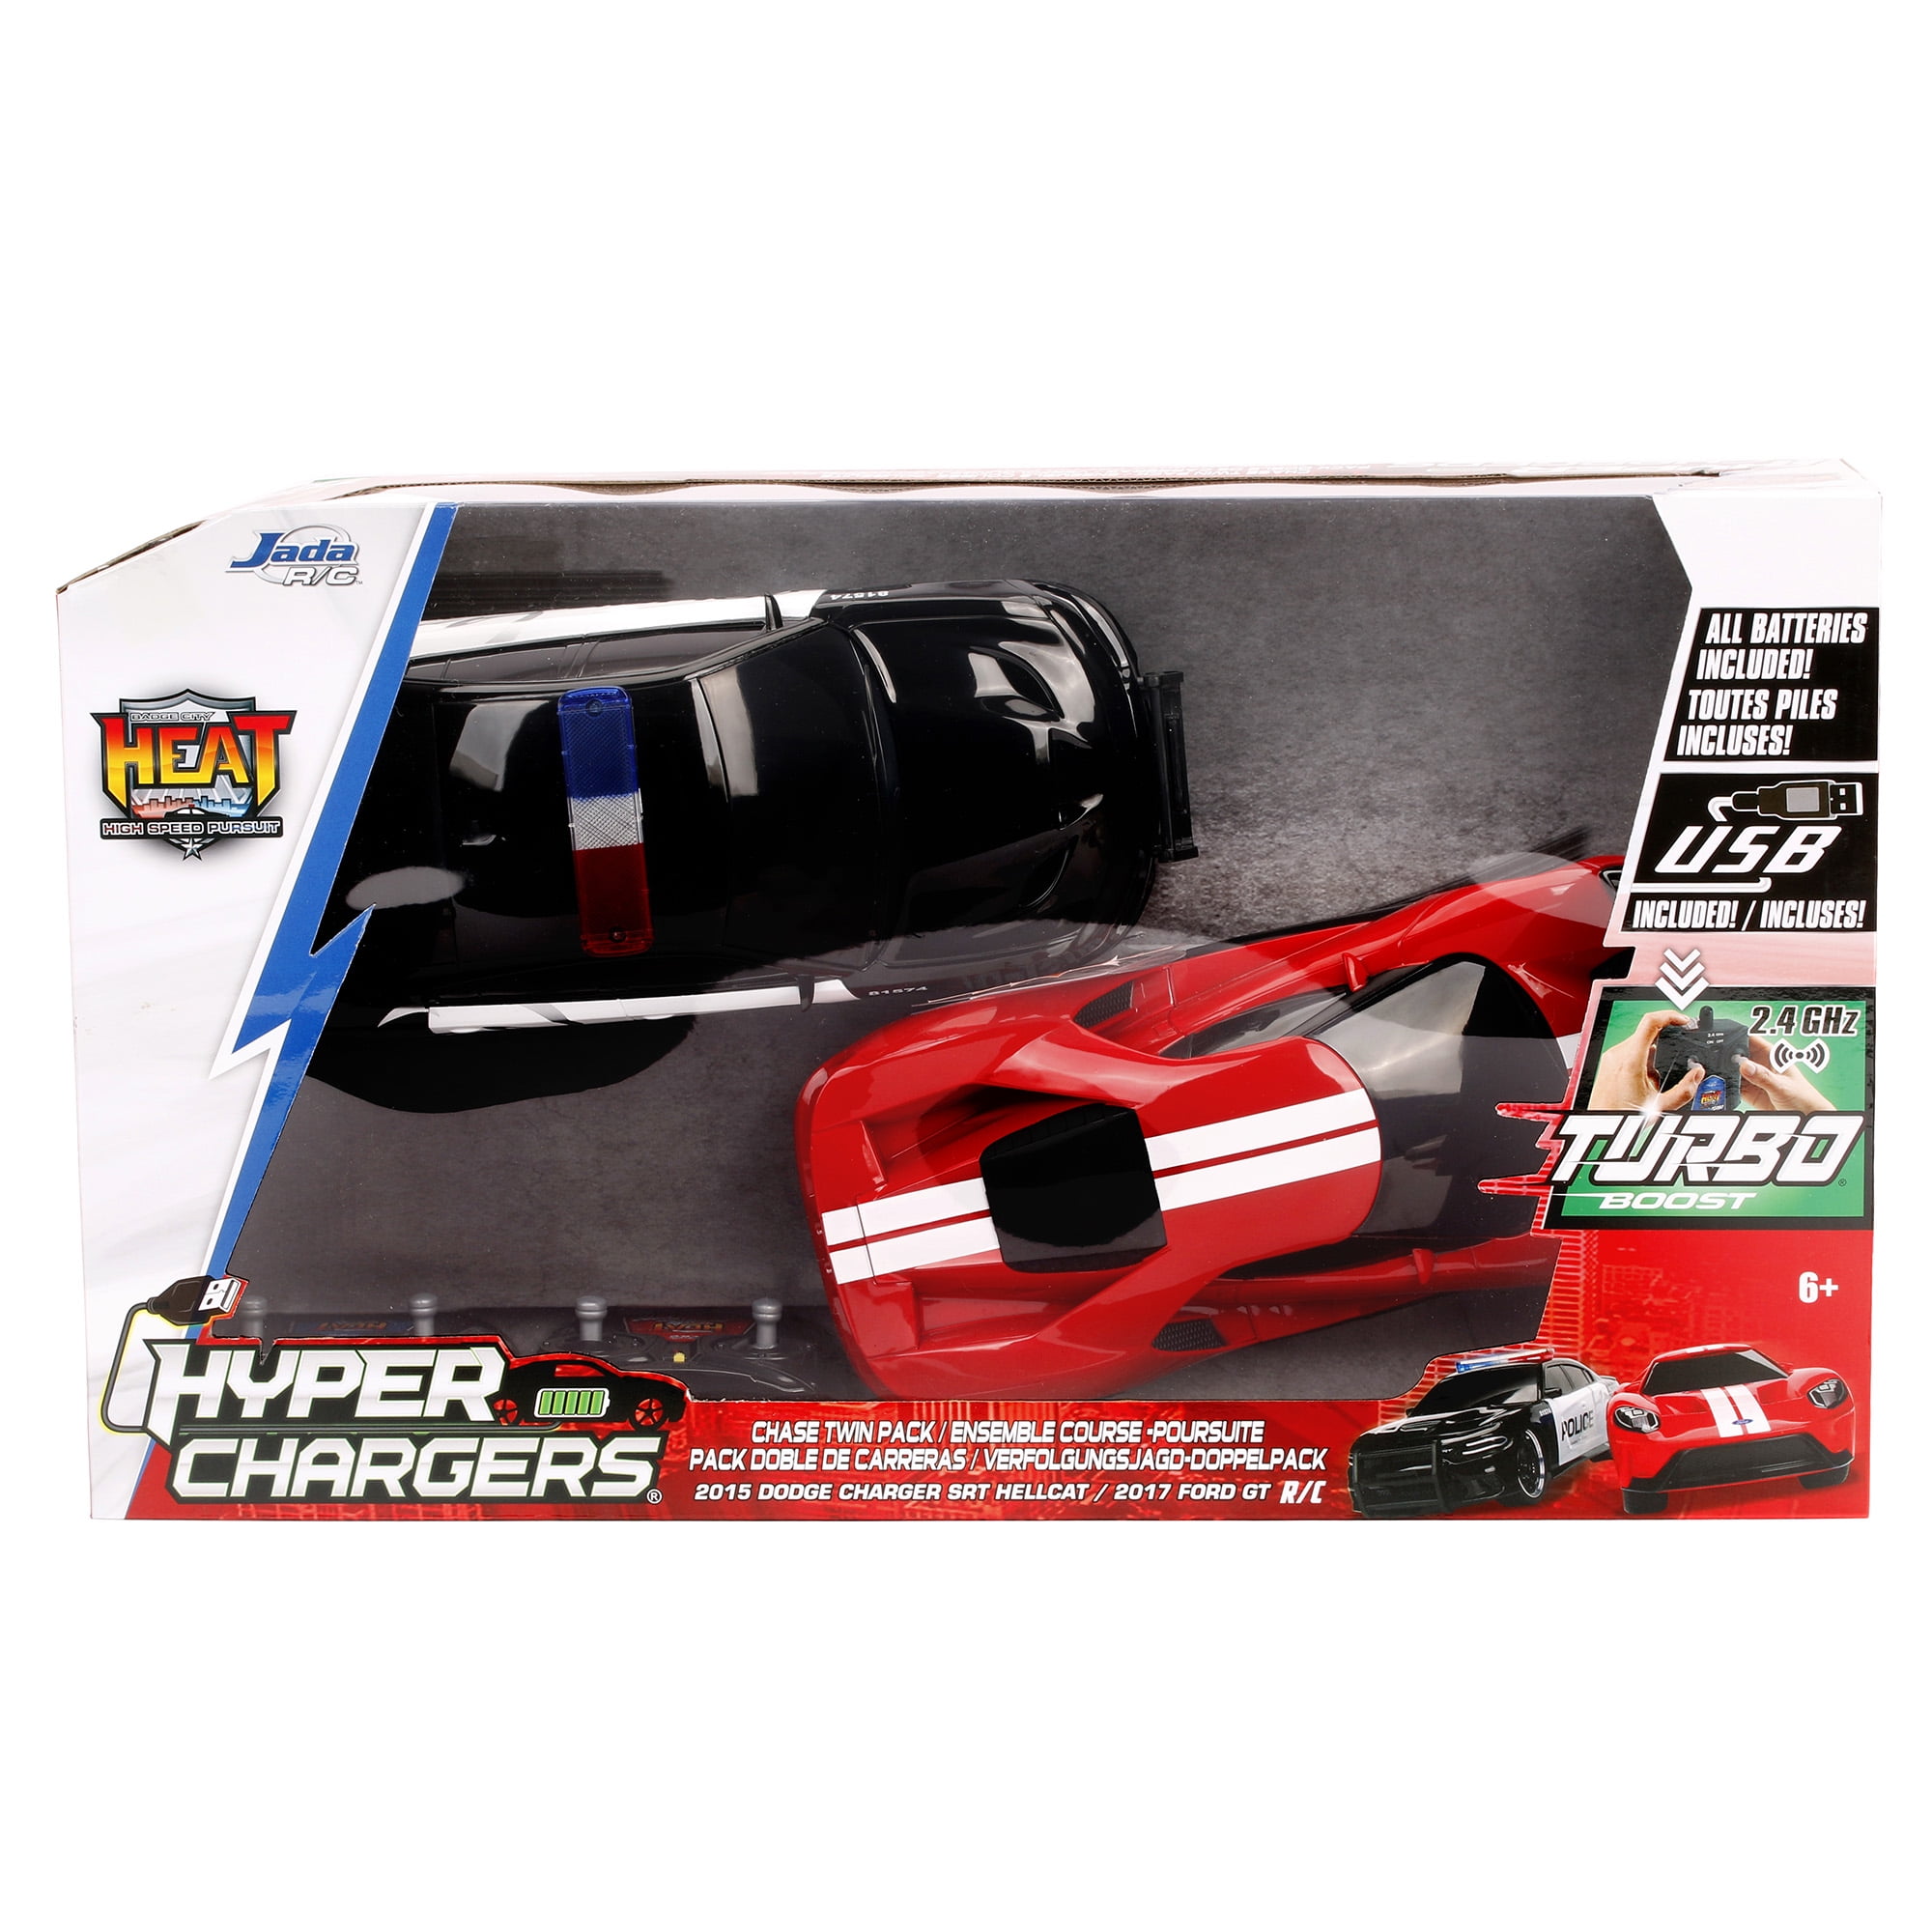 Scale 1:16 Jada Cars Radio Control Hyperchargers Red 2017 Ford GT 